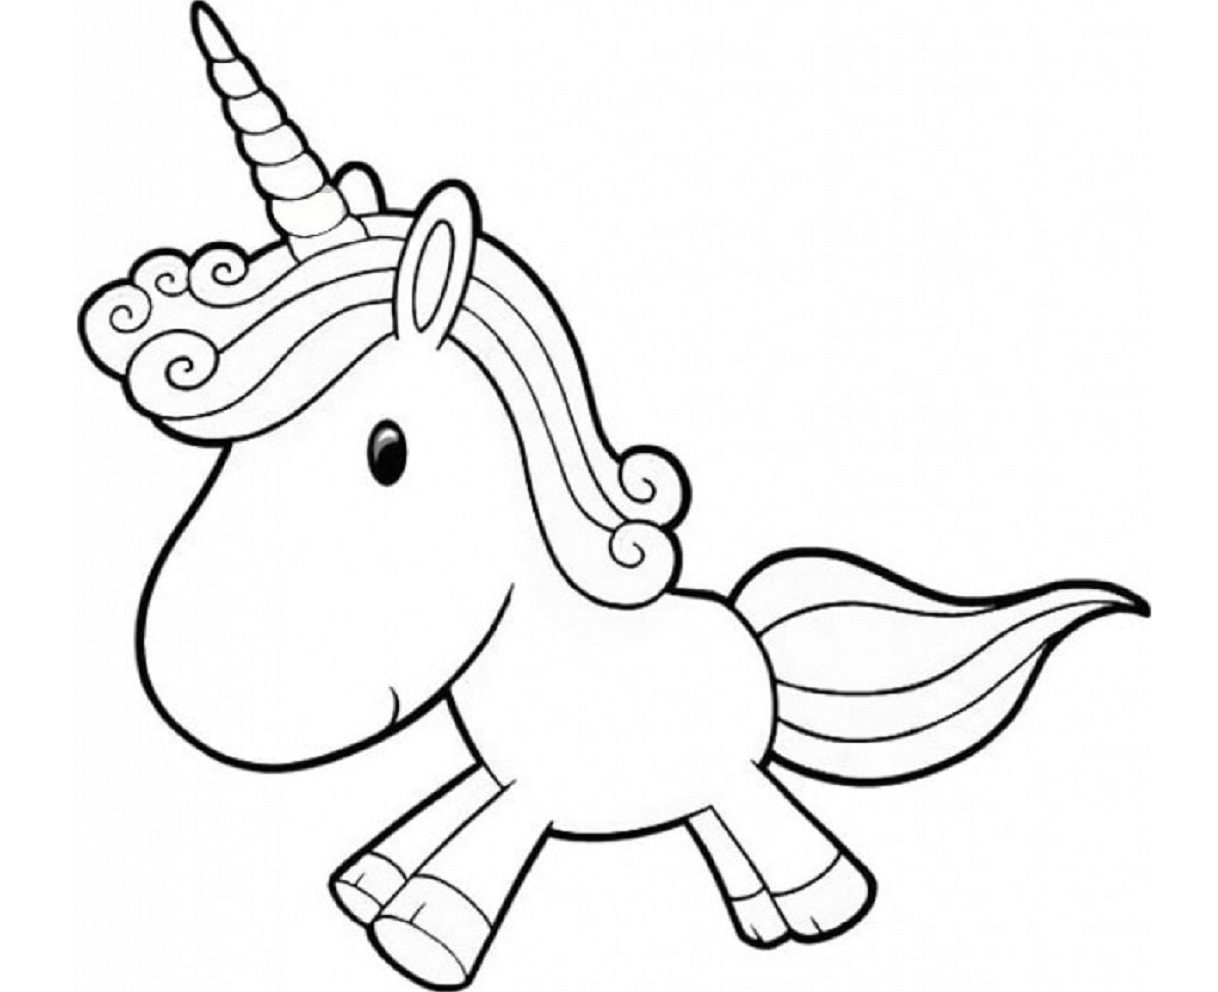 Unicorn Coloring Pages Free Printable Coloring Pages For Kids - chibi little mermaid coloring page for girls roblox